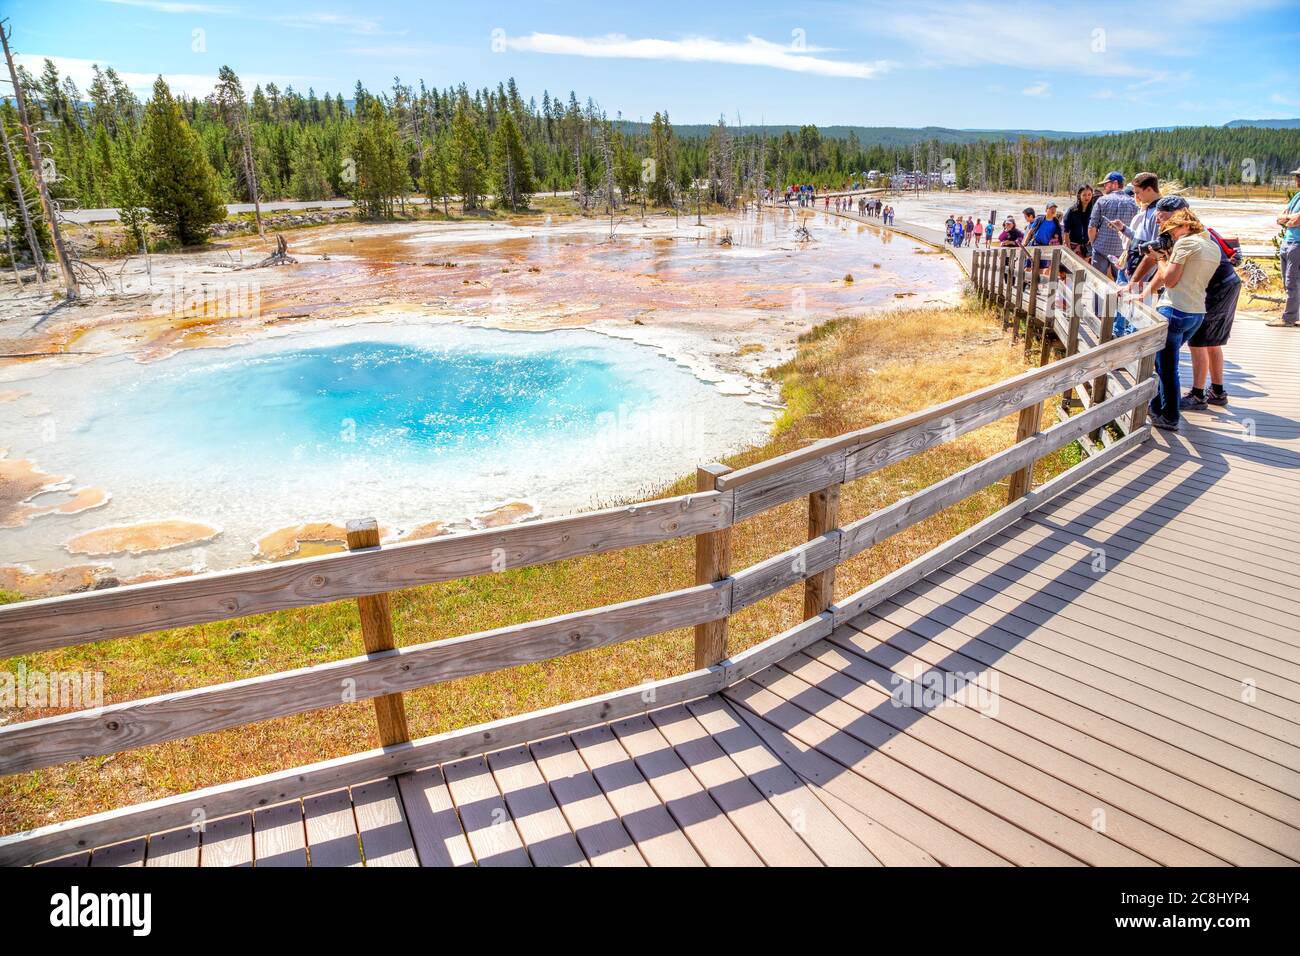 Wyoming, USA - Aug 24, 2019: Visitors at Silex Spring, a hot spring pool in the Lower Geyser Basin of Fountain Paint Pot at Yellowstone National Park. Stock Photo